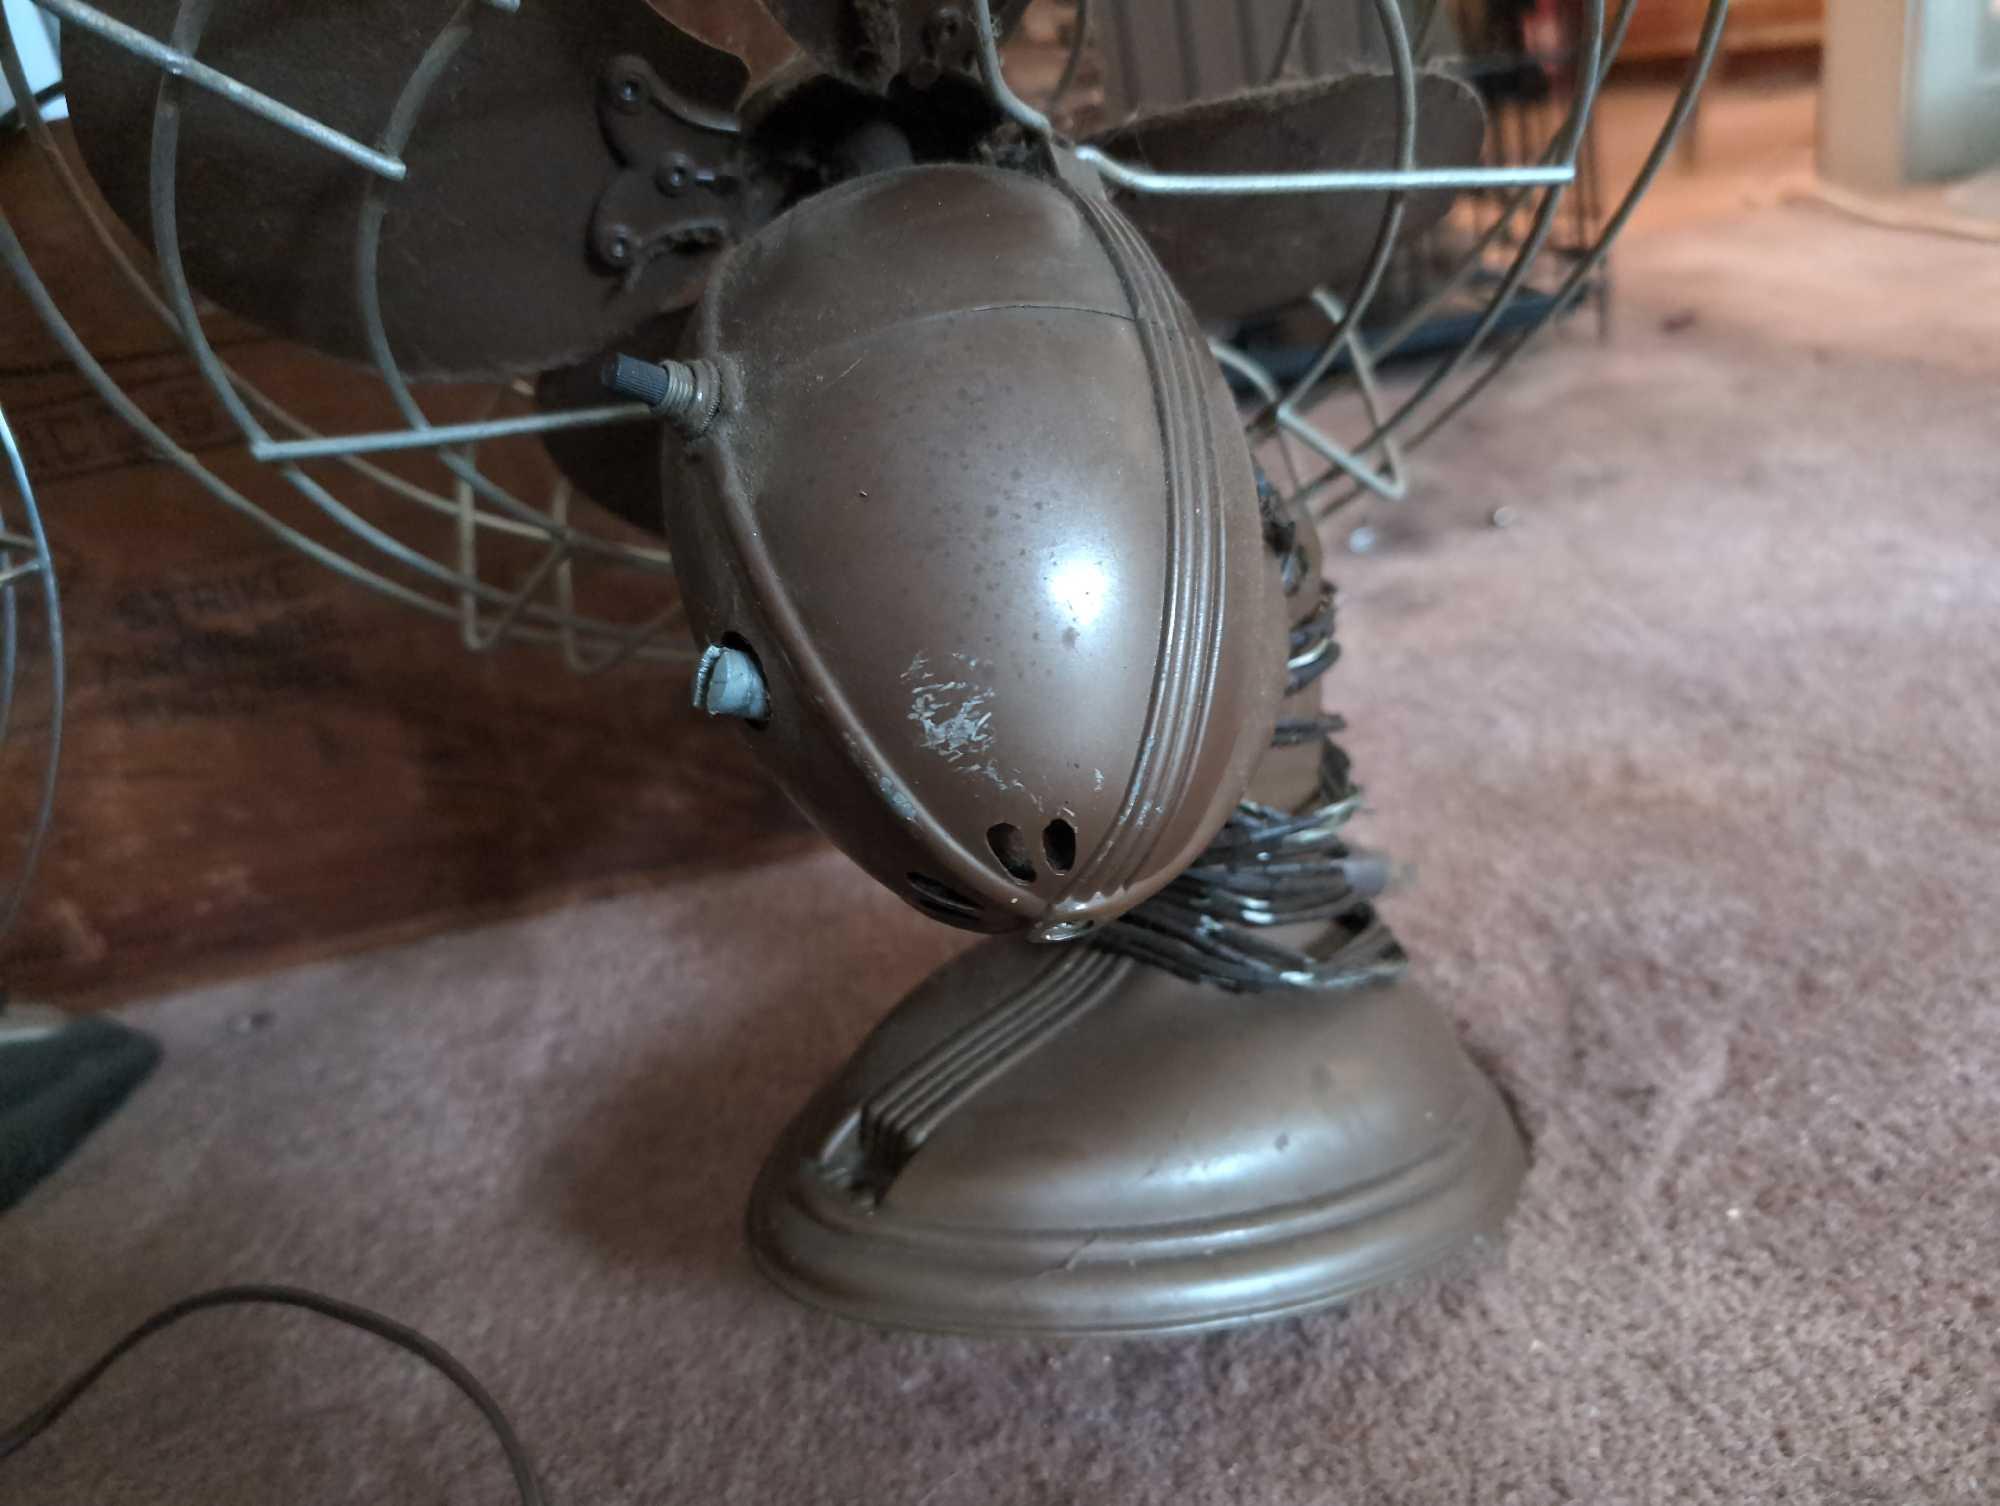 (LR) LOT TO INCLUDE: A VINTAGE ROBBINS & MYERS METAL ELECTRIC FAN, VINTAGE DOMNICK ELECTRIC METAL